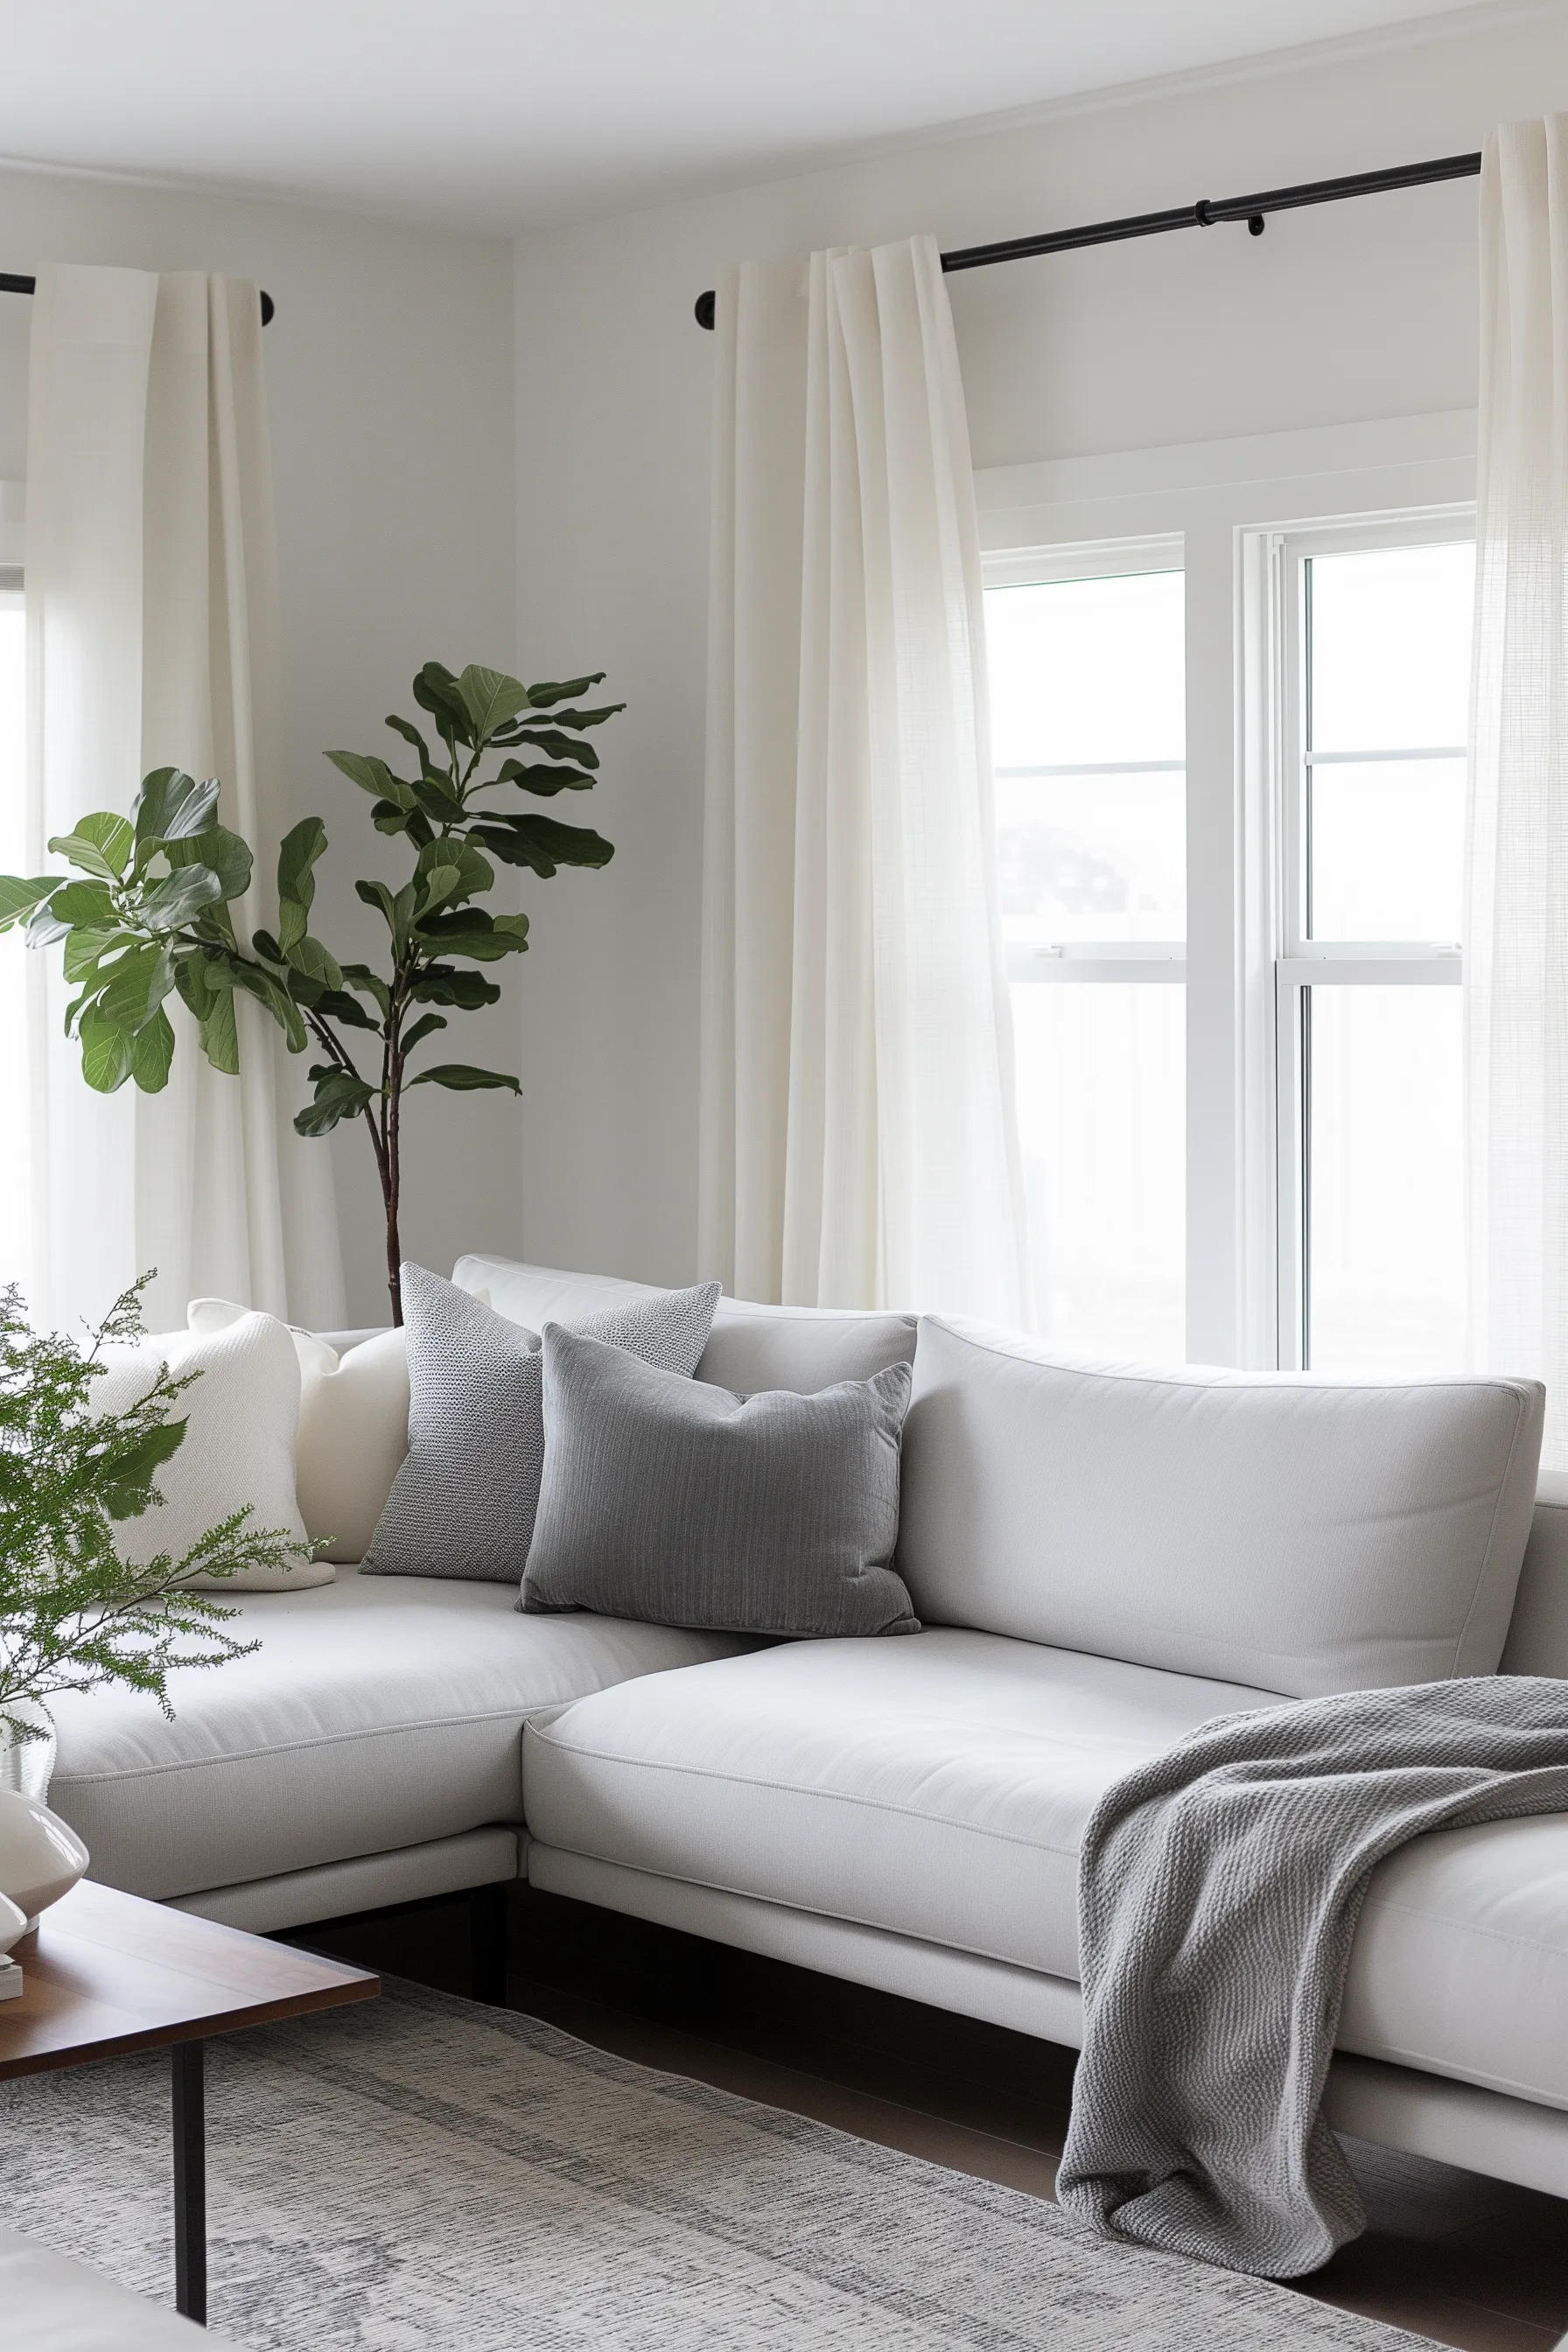 A grey and white sofa with plants